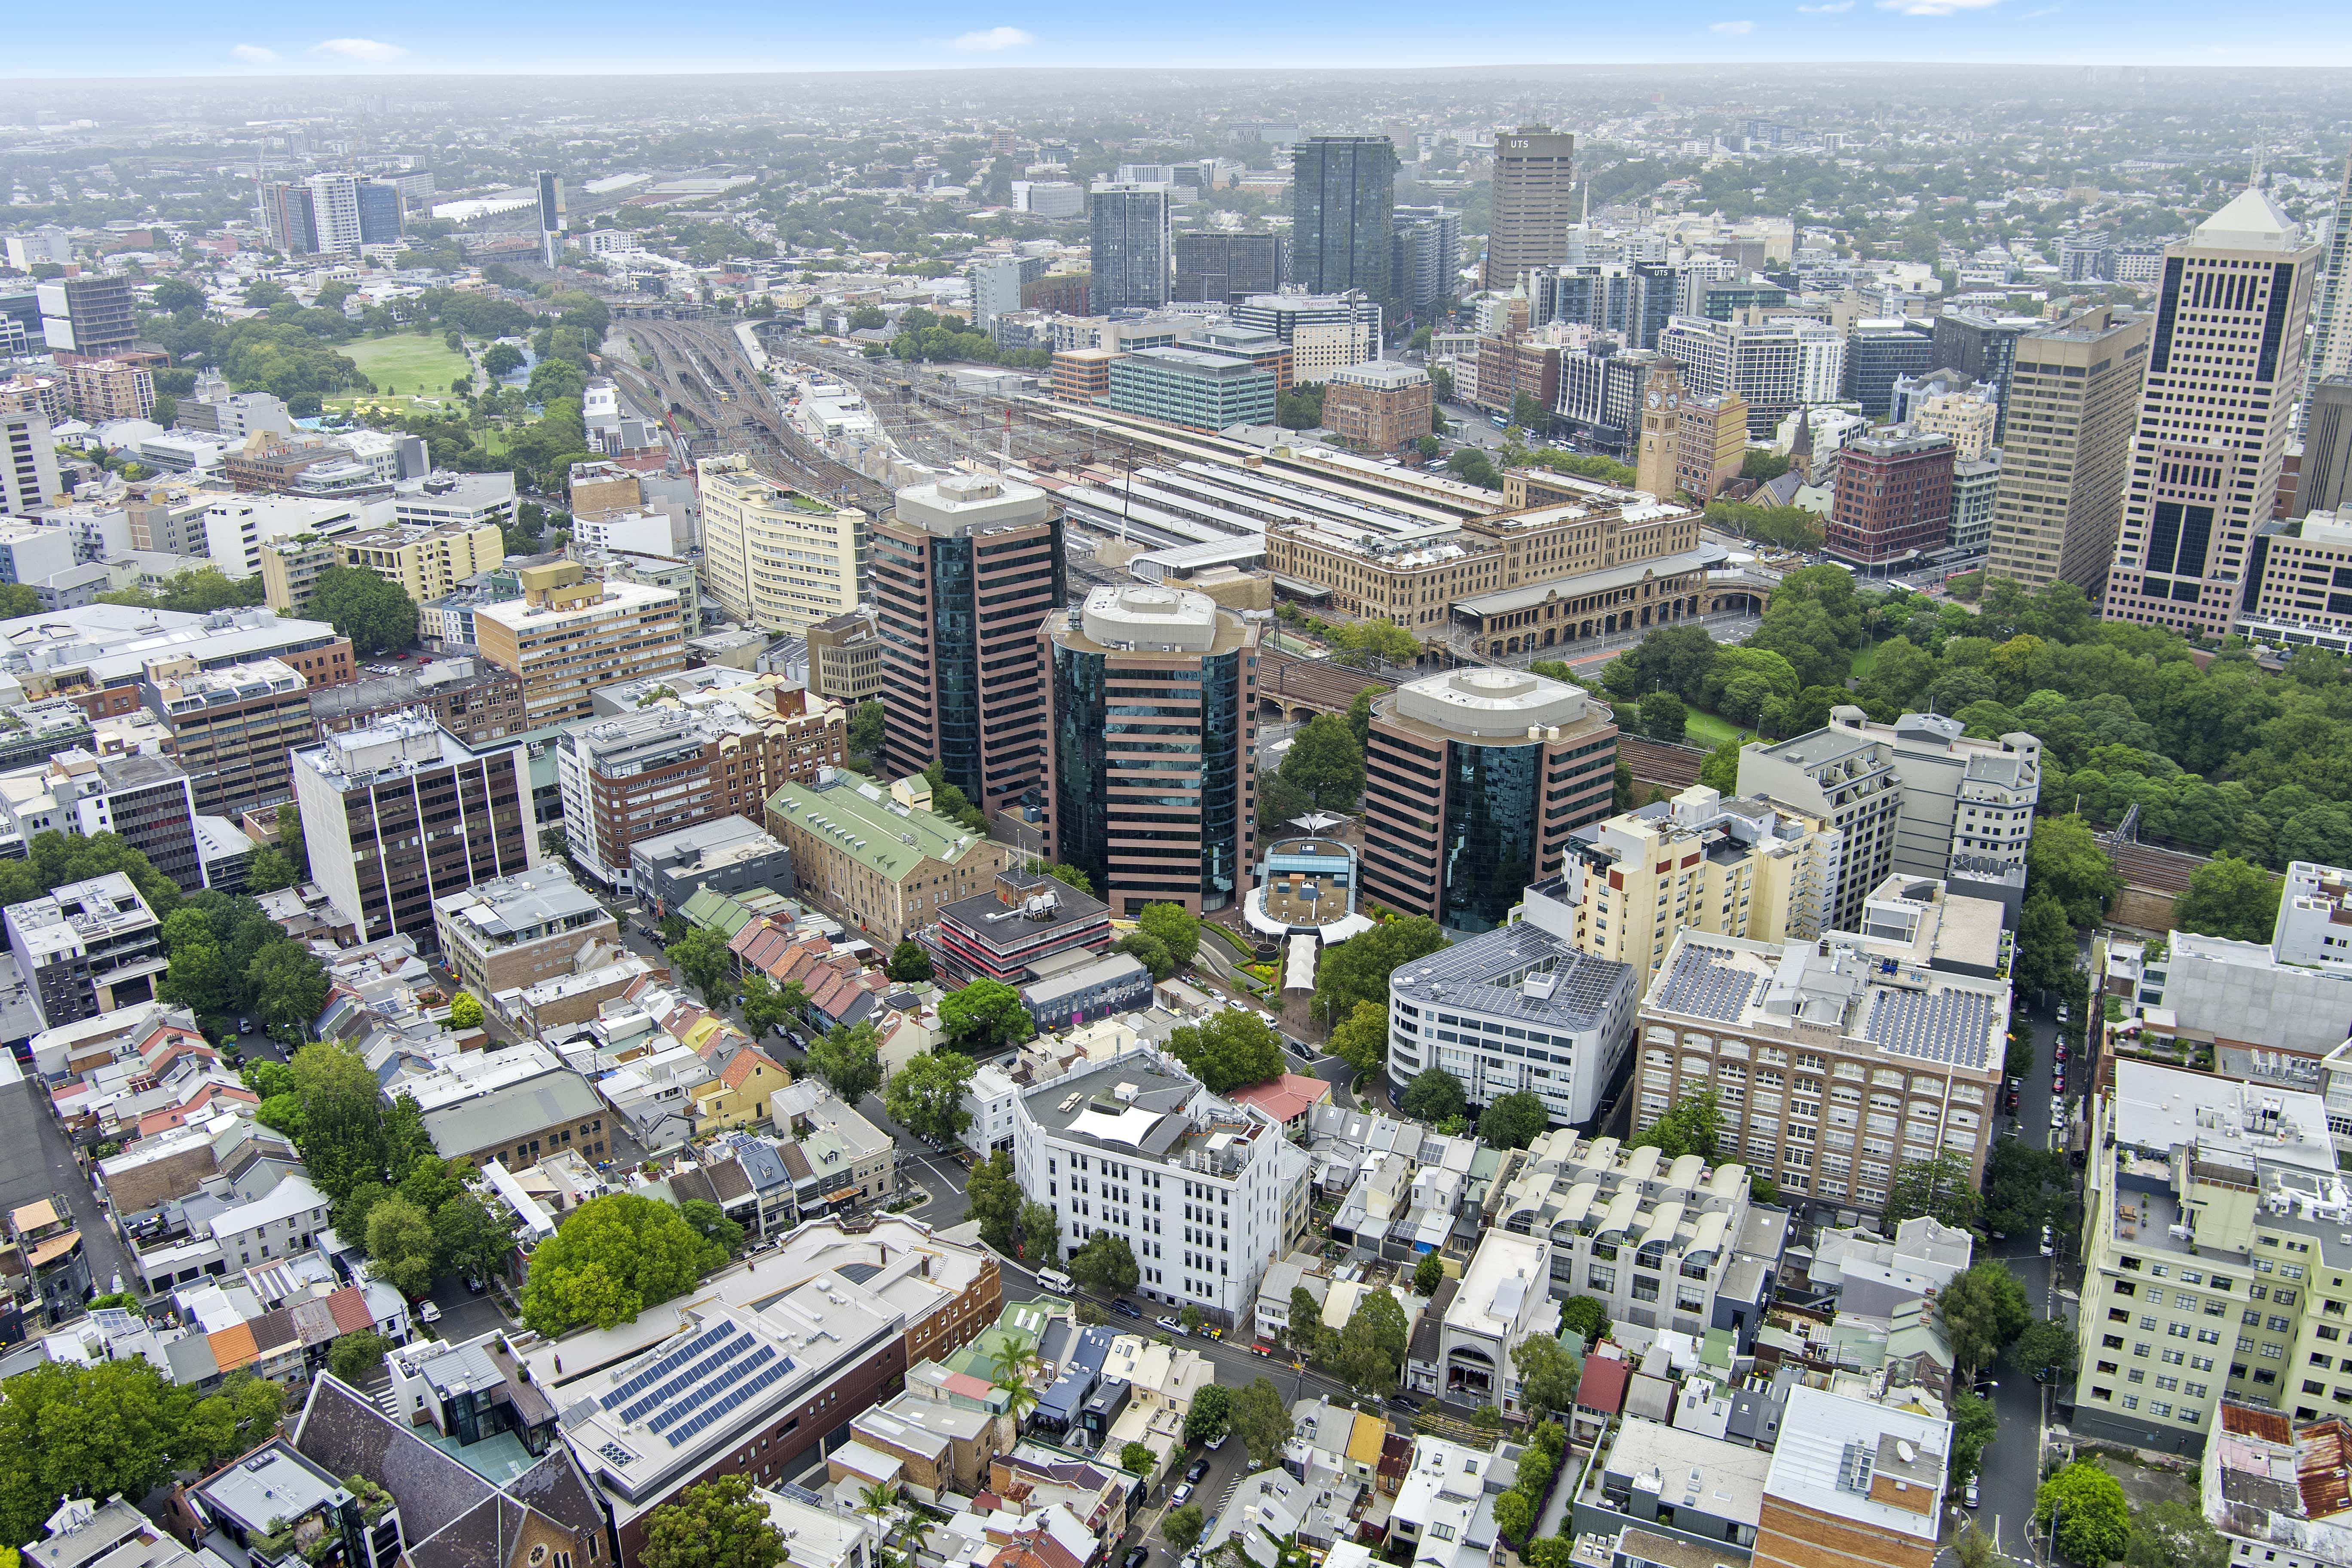 Surry Hills site to benefit from expanding tech precinct